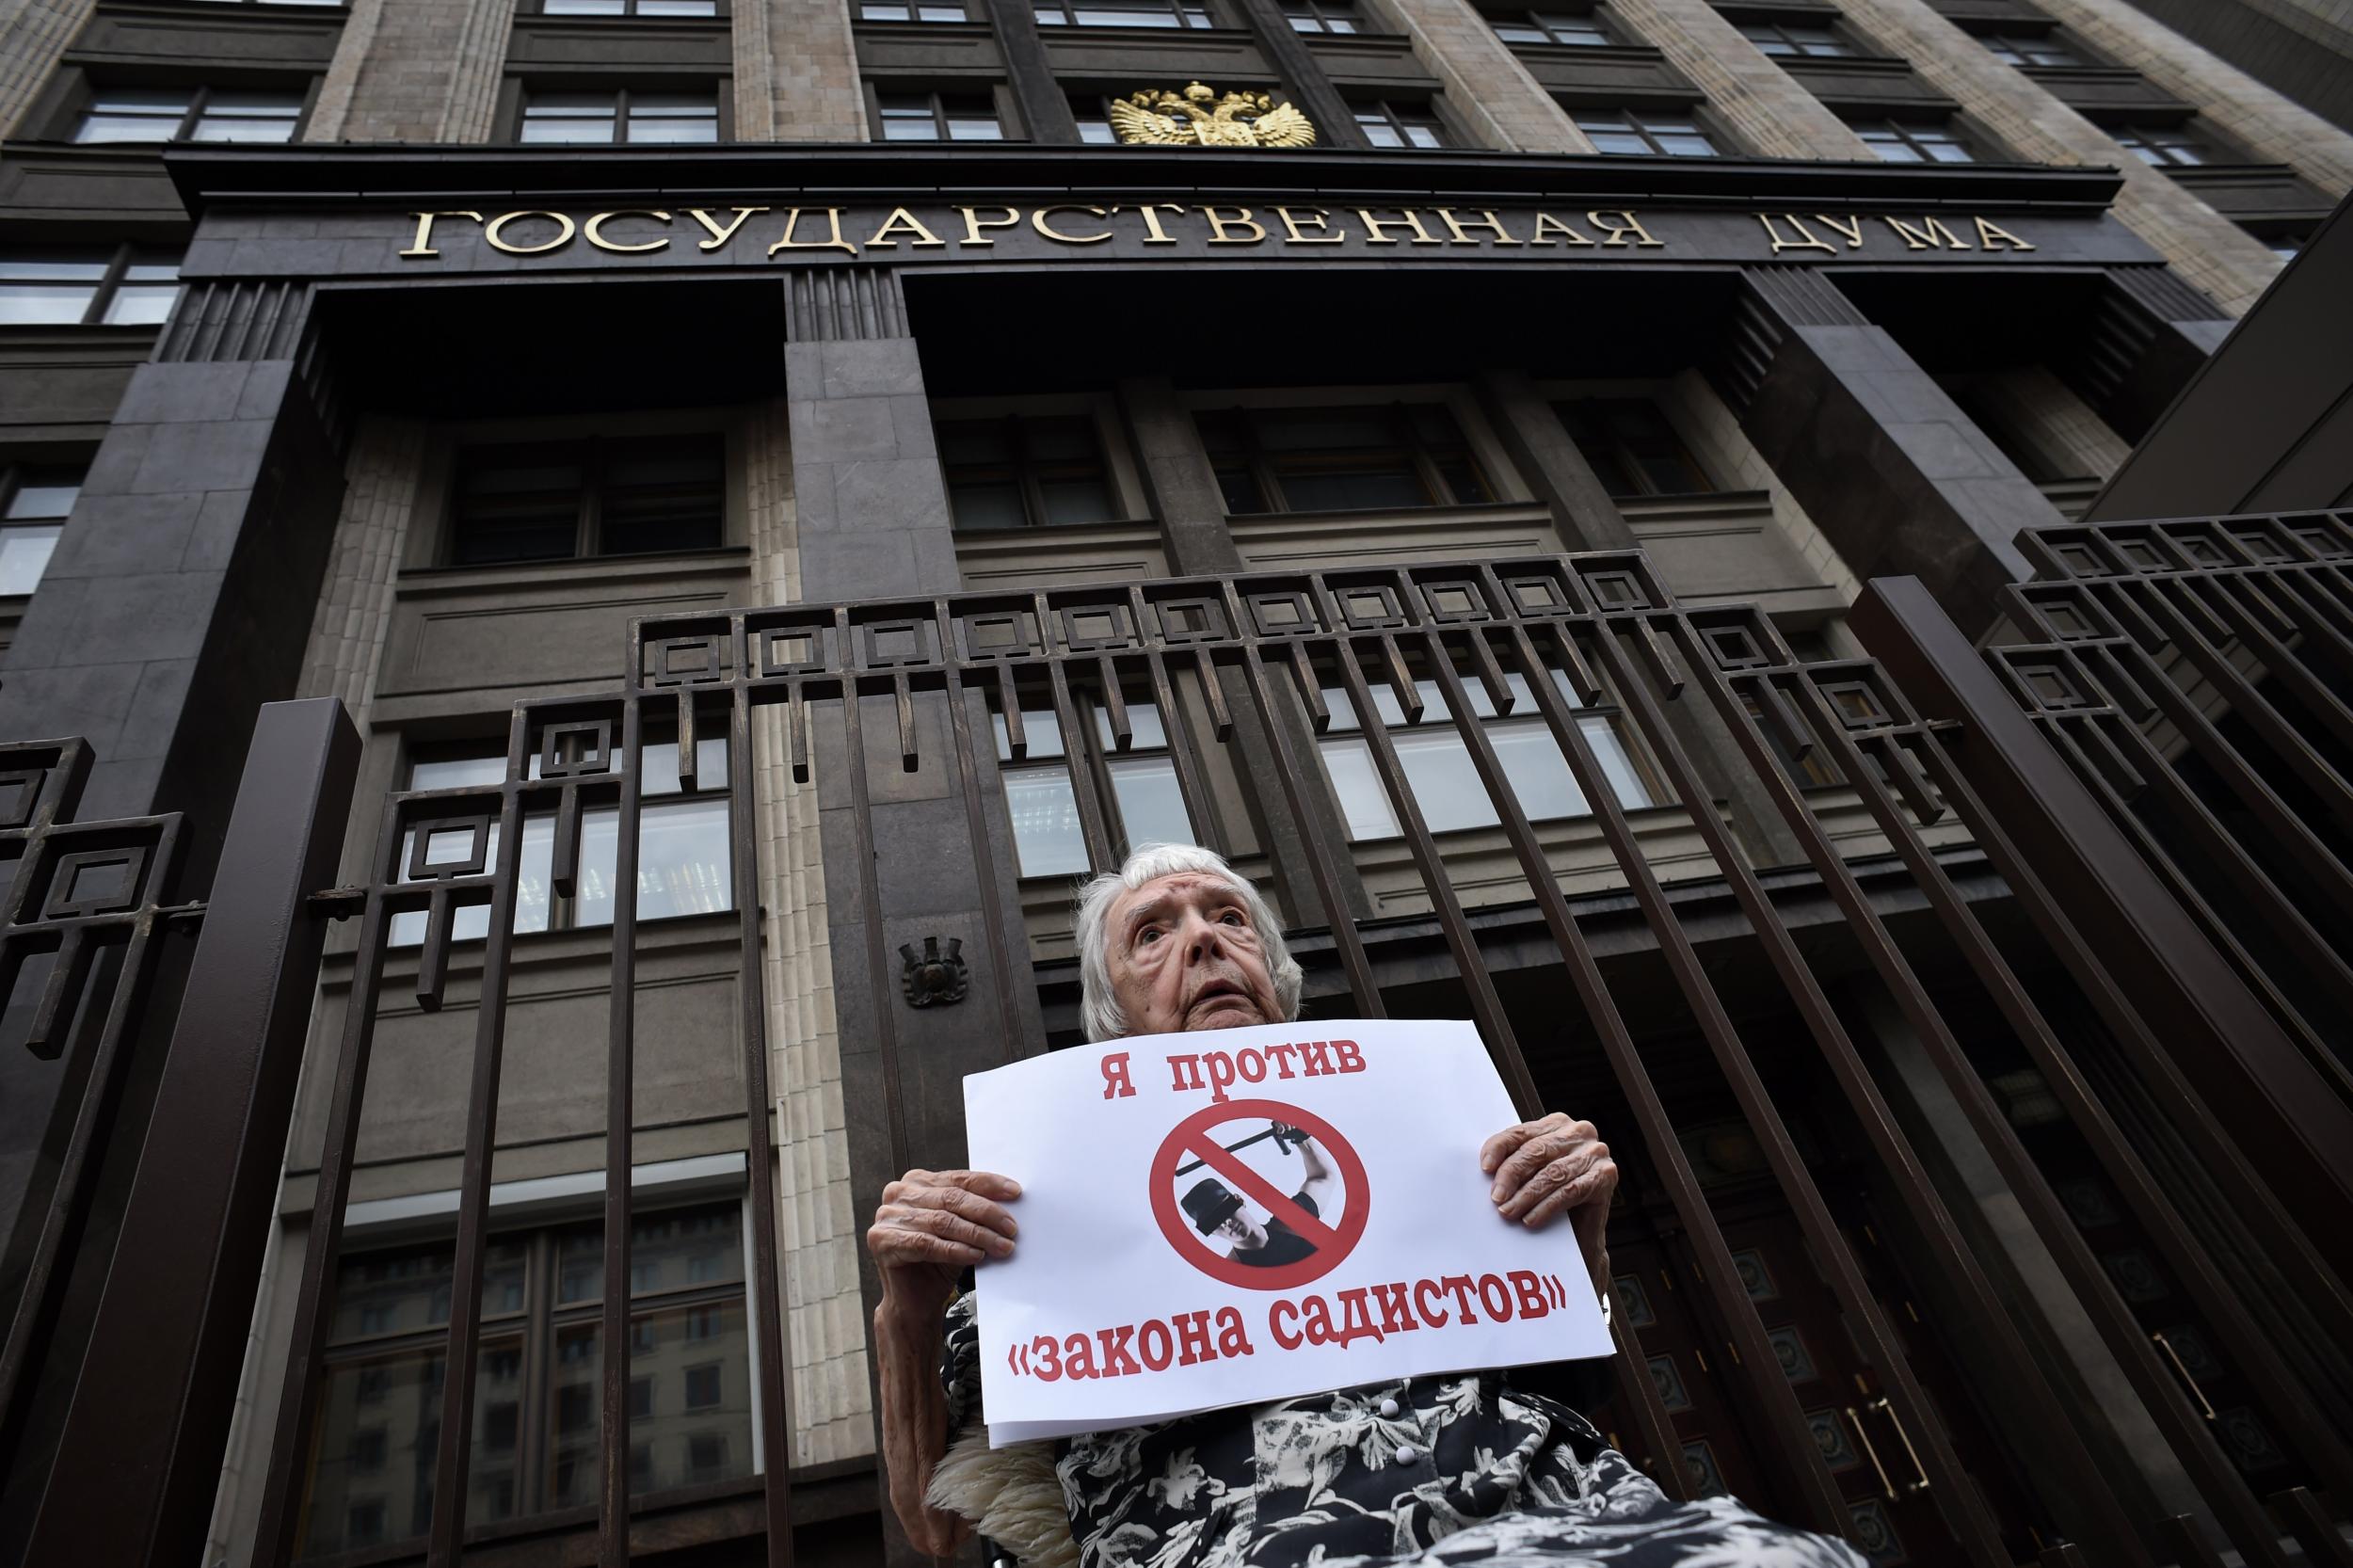 At the State Duma in 2015 protesting against the ‘sadists’ law’ which critics claimed legitimised torture in Russian jails